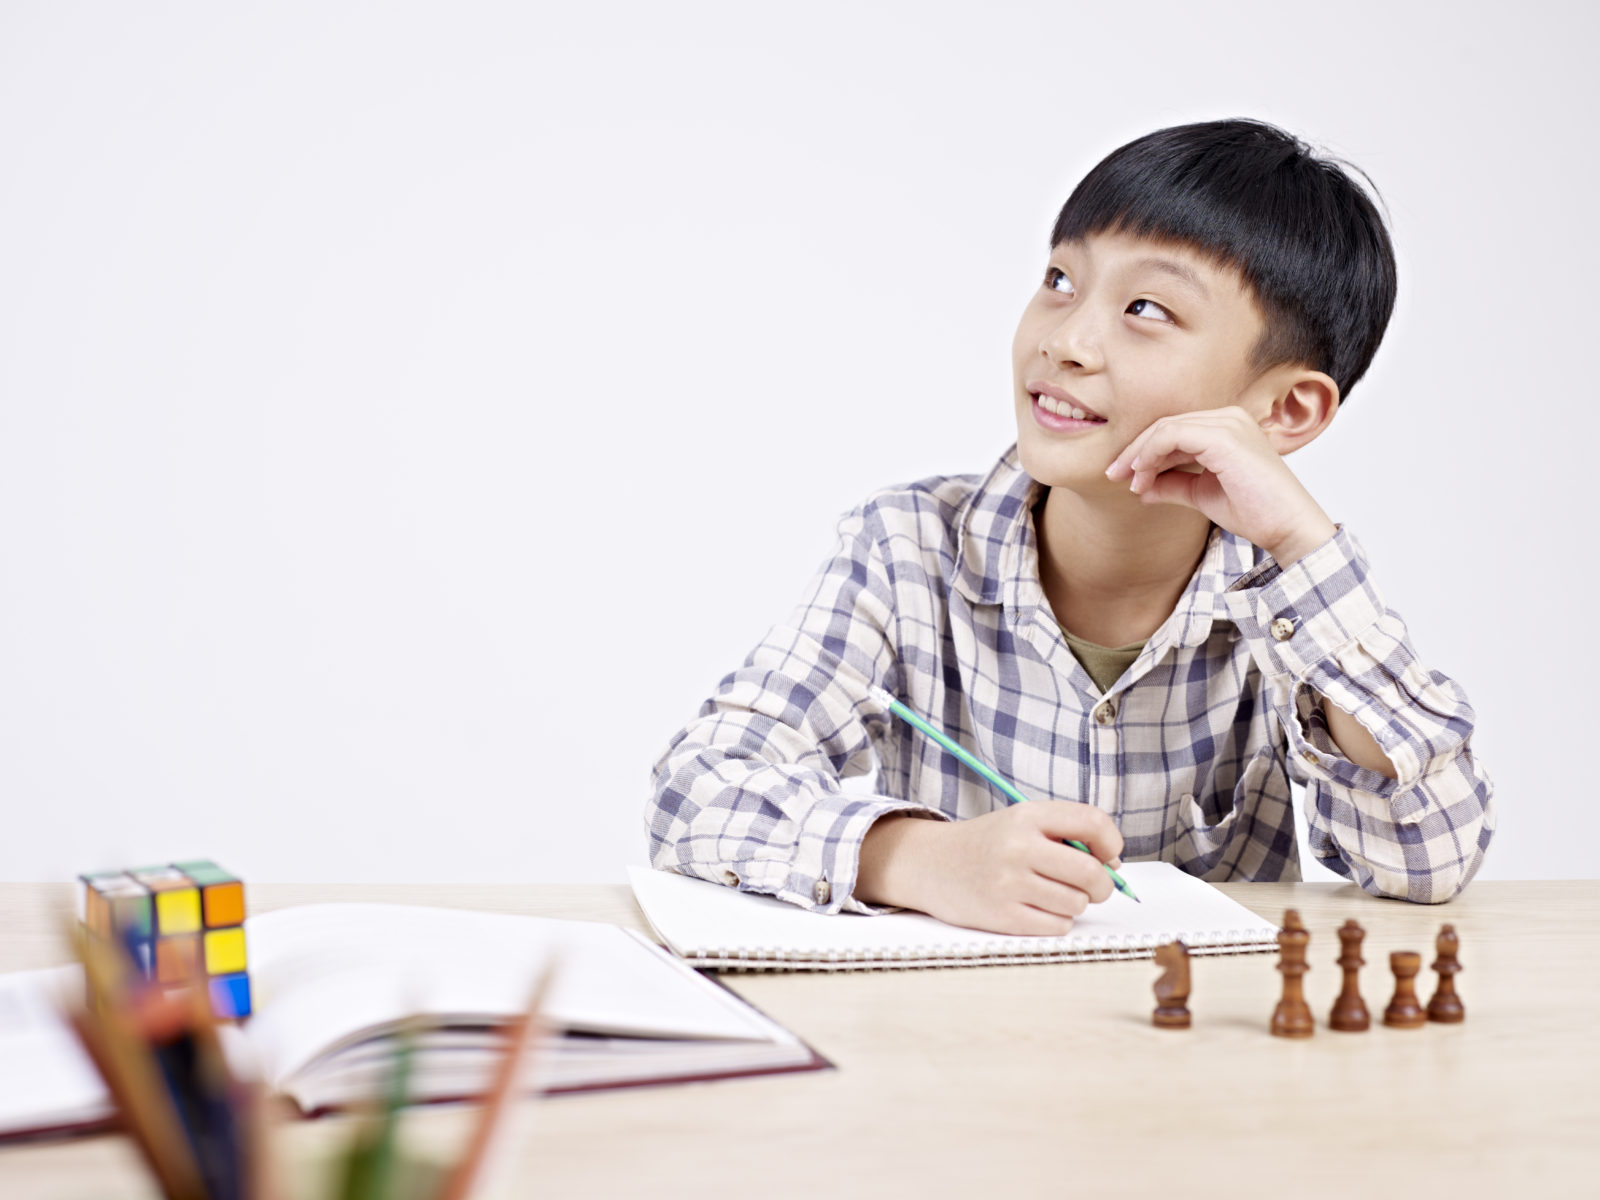 10 year-old asian elementary schoolboy looking away while studying.